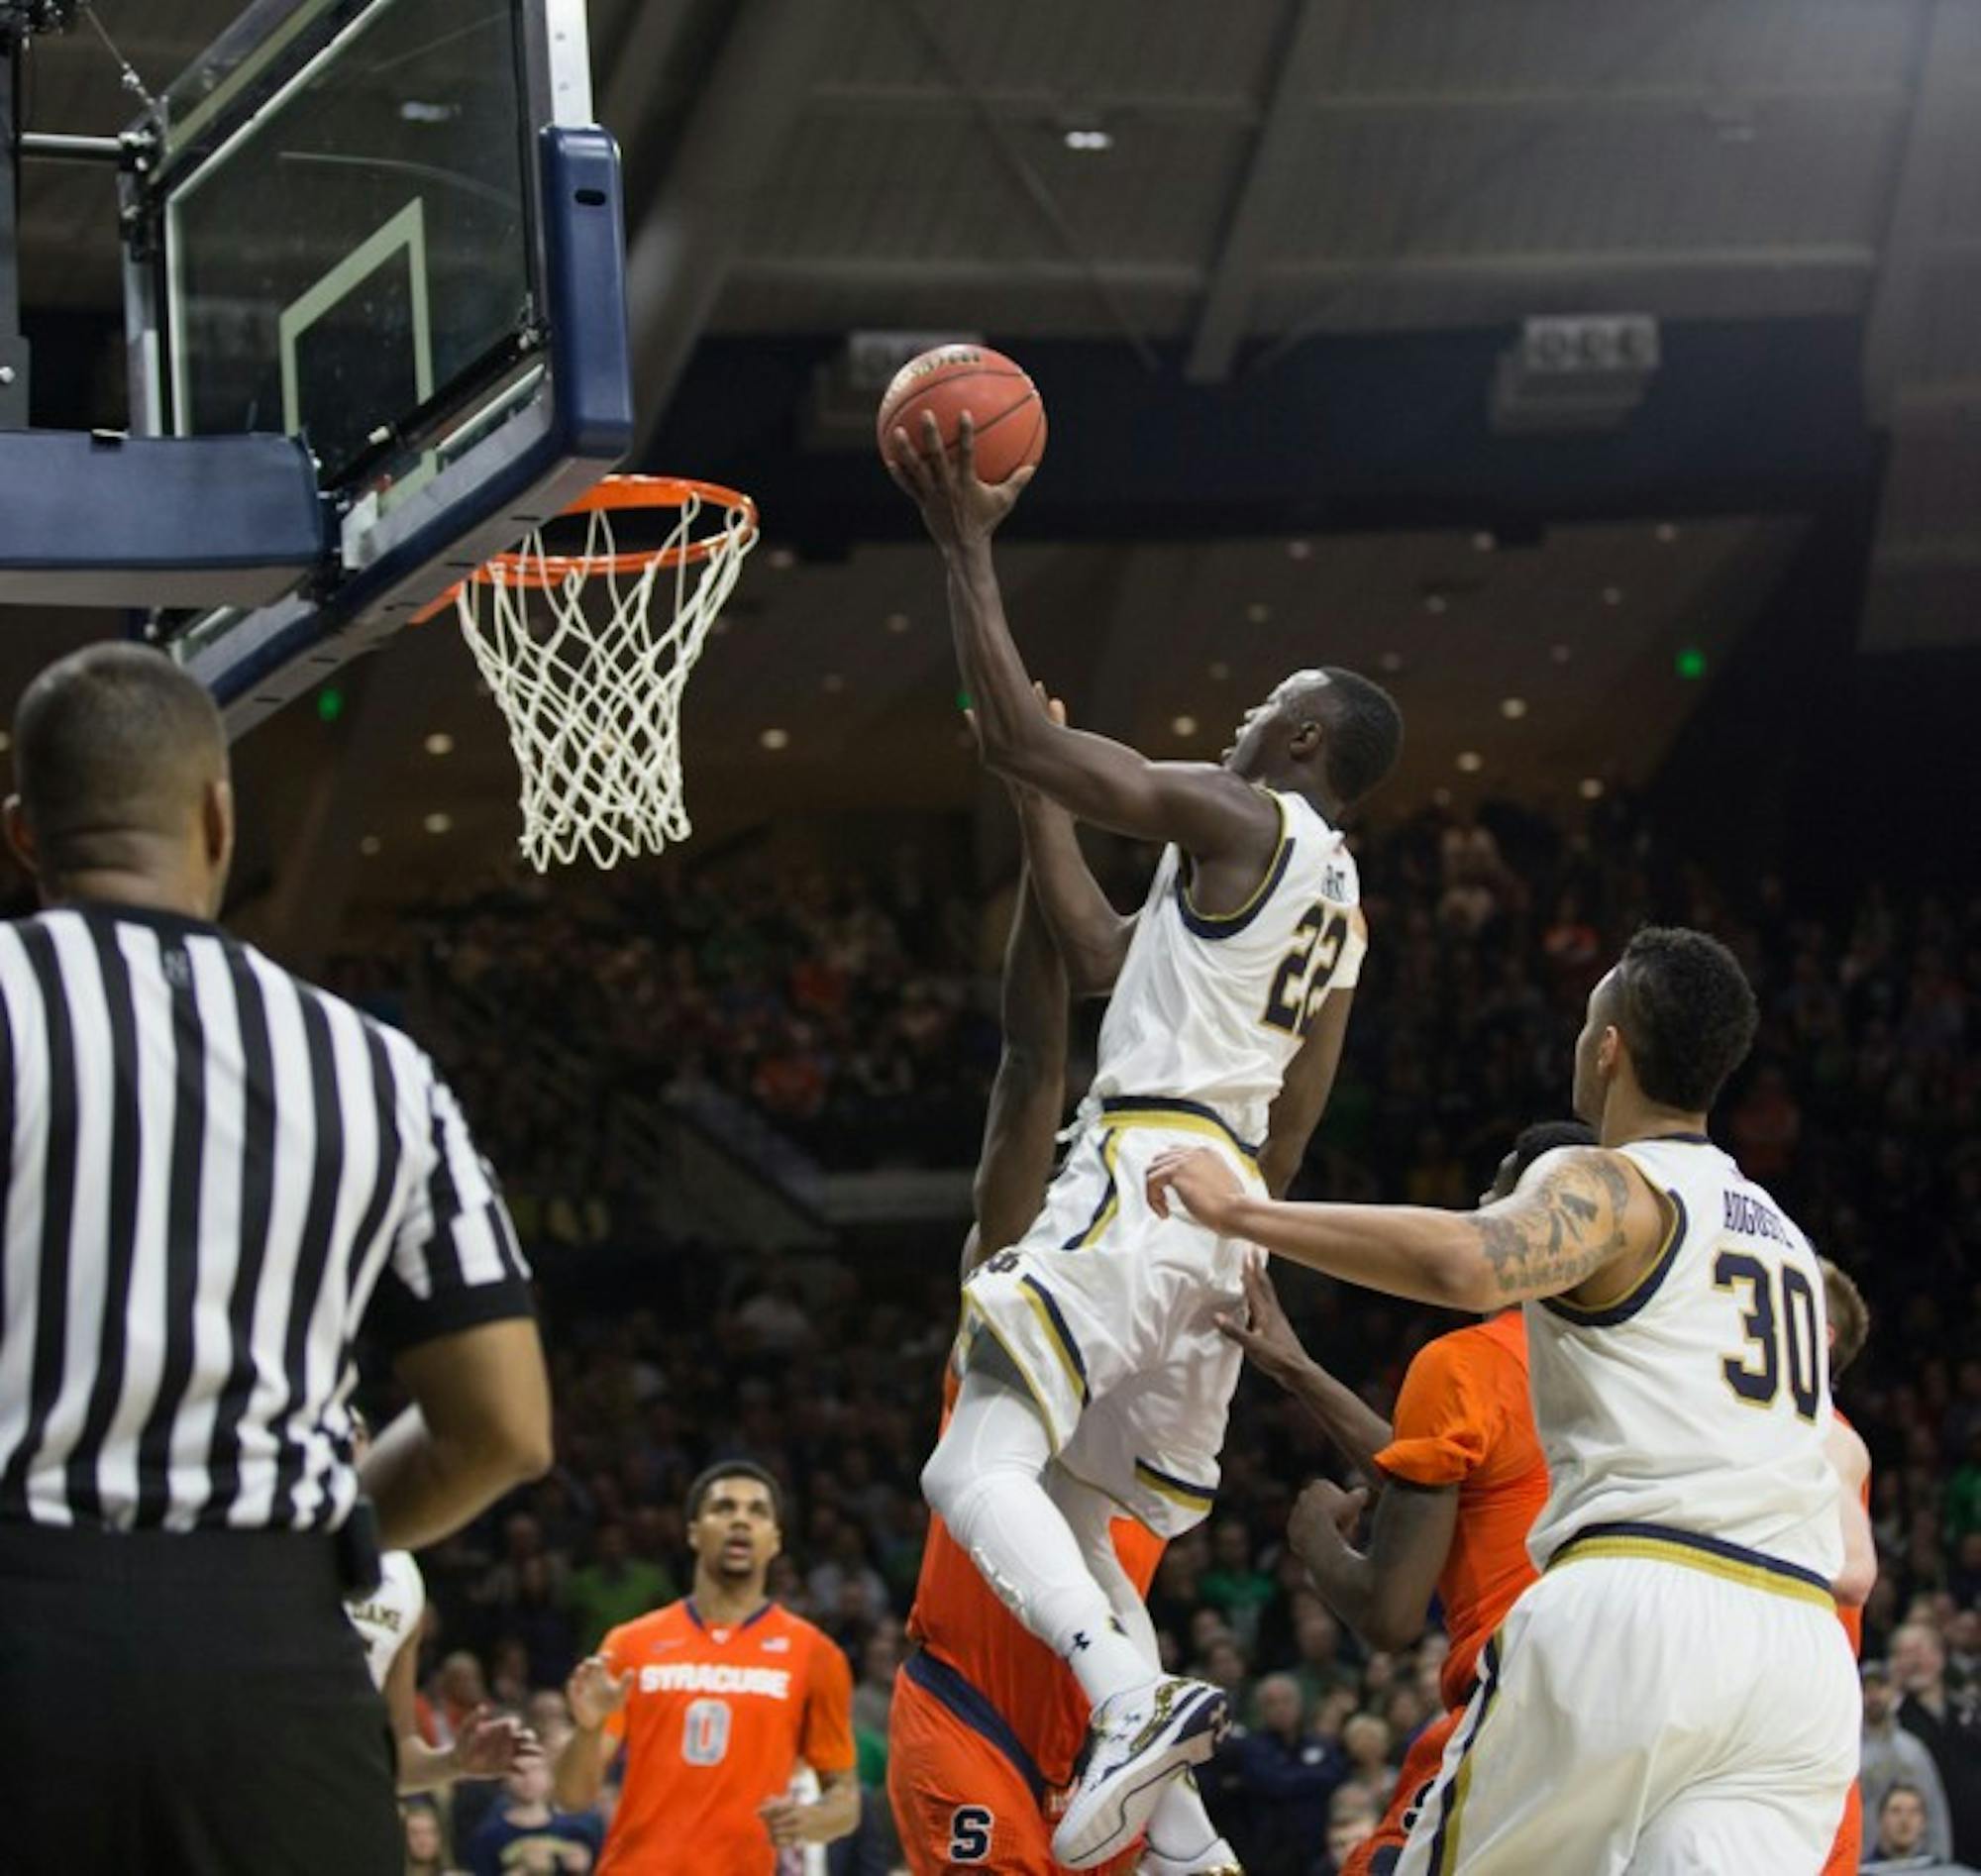 Senior guard Jerian Grant goes up for a layup attempt during Notre Dame’s 65-60 loss to Syracuse on Feb. 24 at Purcell Pavilion. Grant finished tied for second in scoring for the Irish with 13 points.